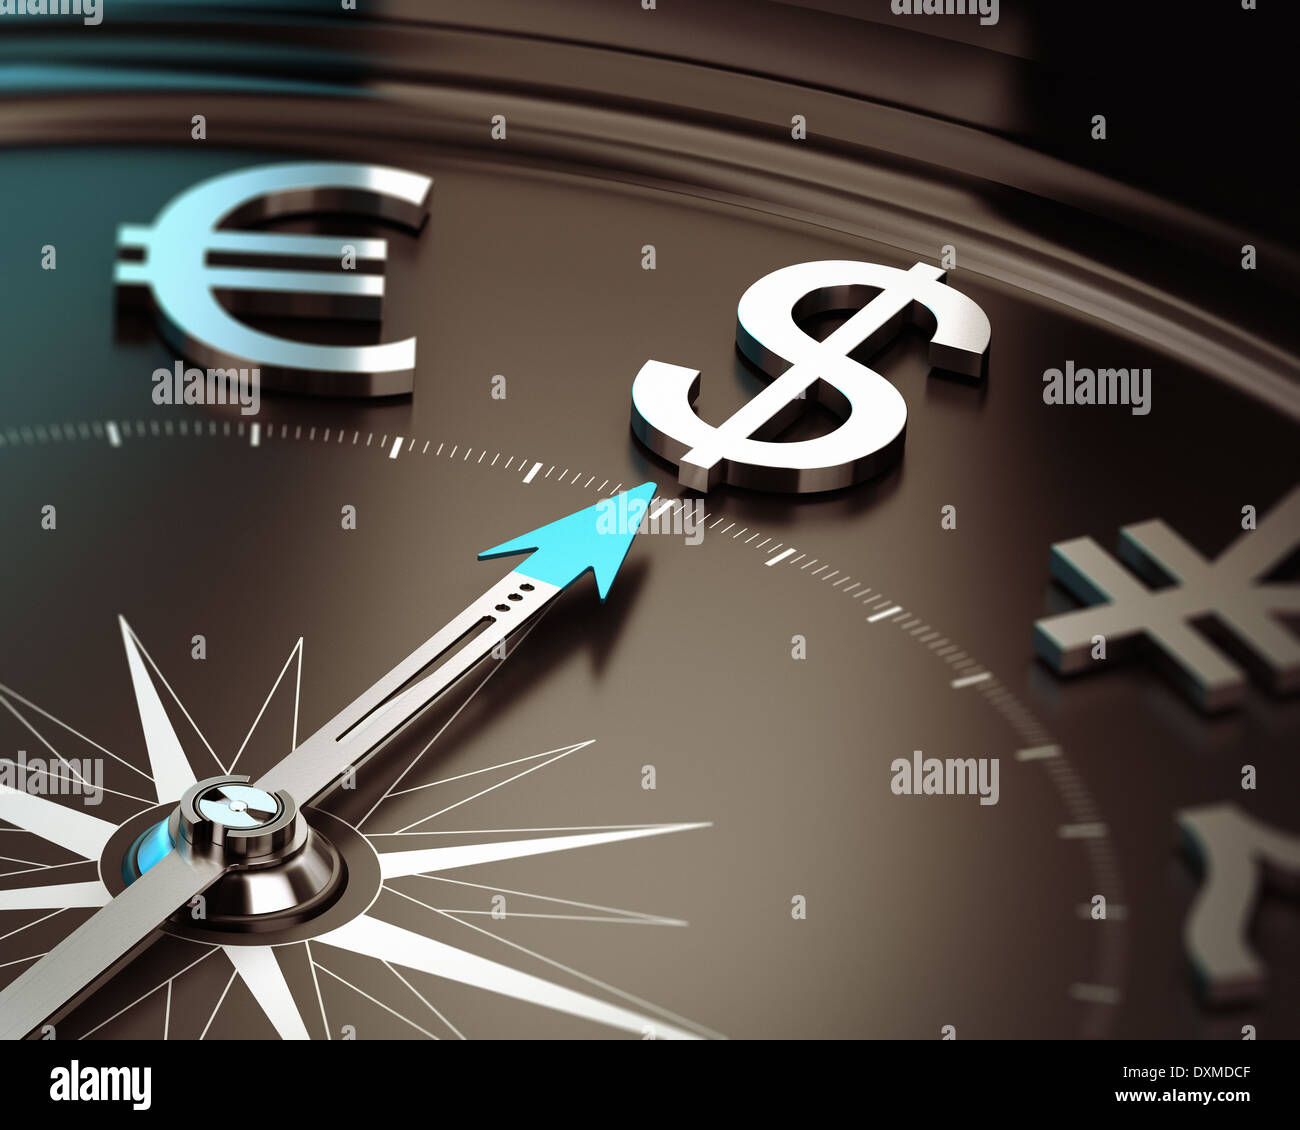 Compass with needle pointing dollar symbol with blur effect. Illustration of US safe heaven currency and investment solutions. Stock Photo